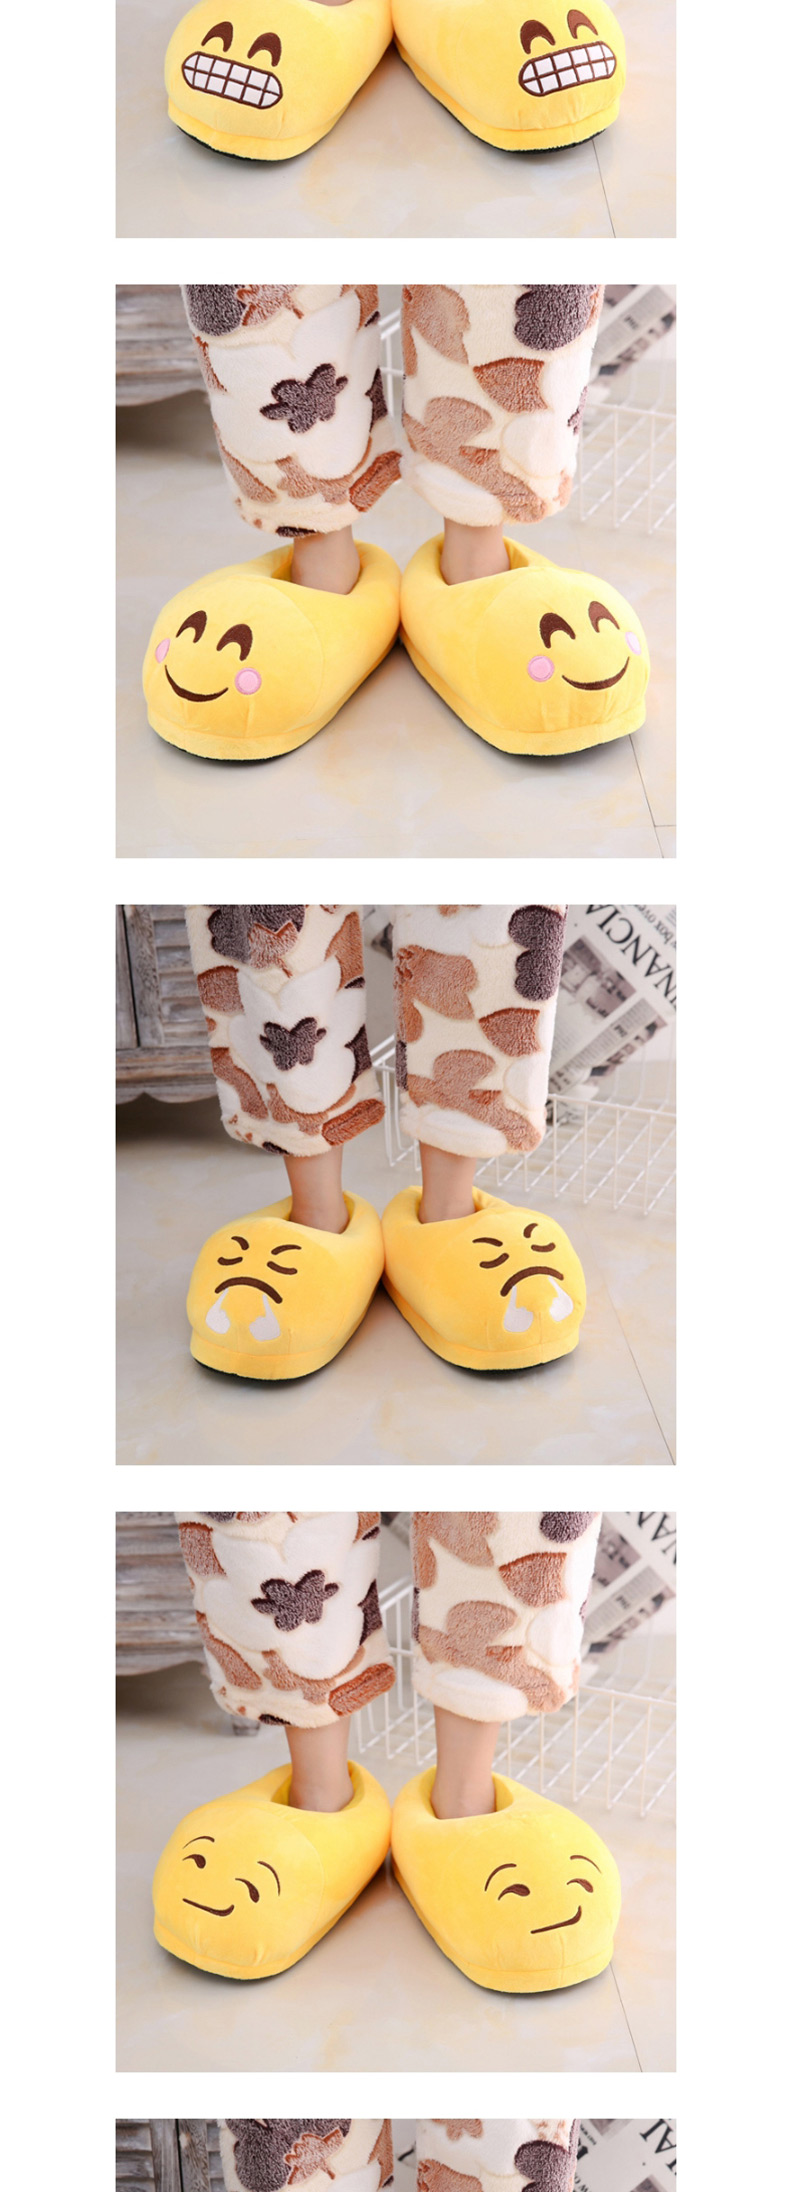 Fashion 7 Yellow Tears Cartoon Expression Plush Bag With Cotton Slippers,Slippers